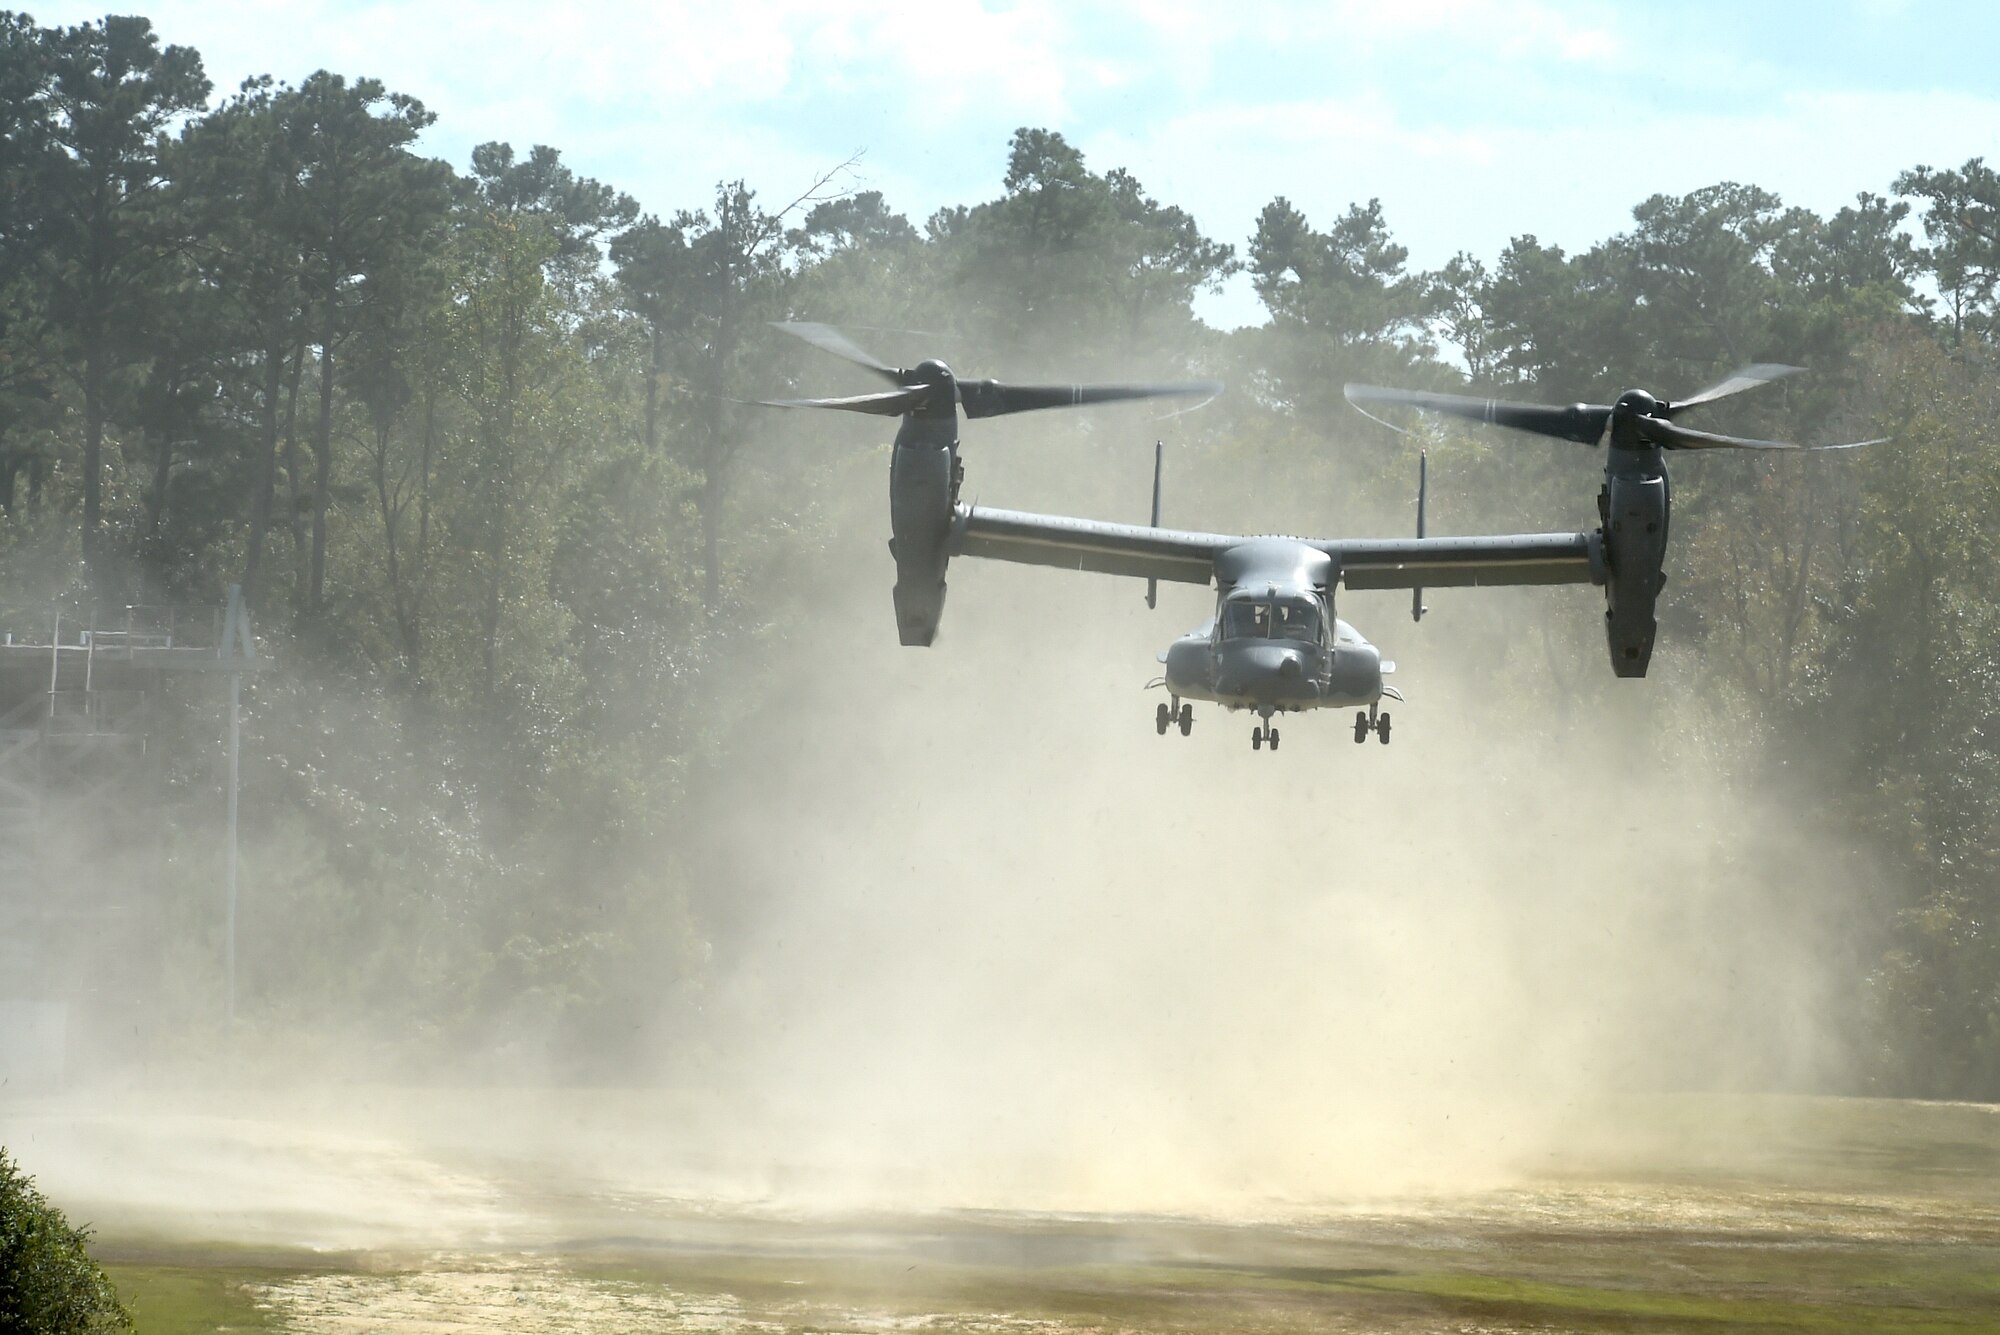 A CV-22 Osprey takes off over Camp Shelby, Miss., during Task Force Exercise Southern Strike, Oct. 26, 2016. The CV-22 crews with the 8th Special Operations Squadron provided infiltration/exfiltration air support for Task Force Exercise Southern Strike. (U.S. Air Force photo by Senior Airman Jeff Parkinson)